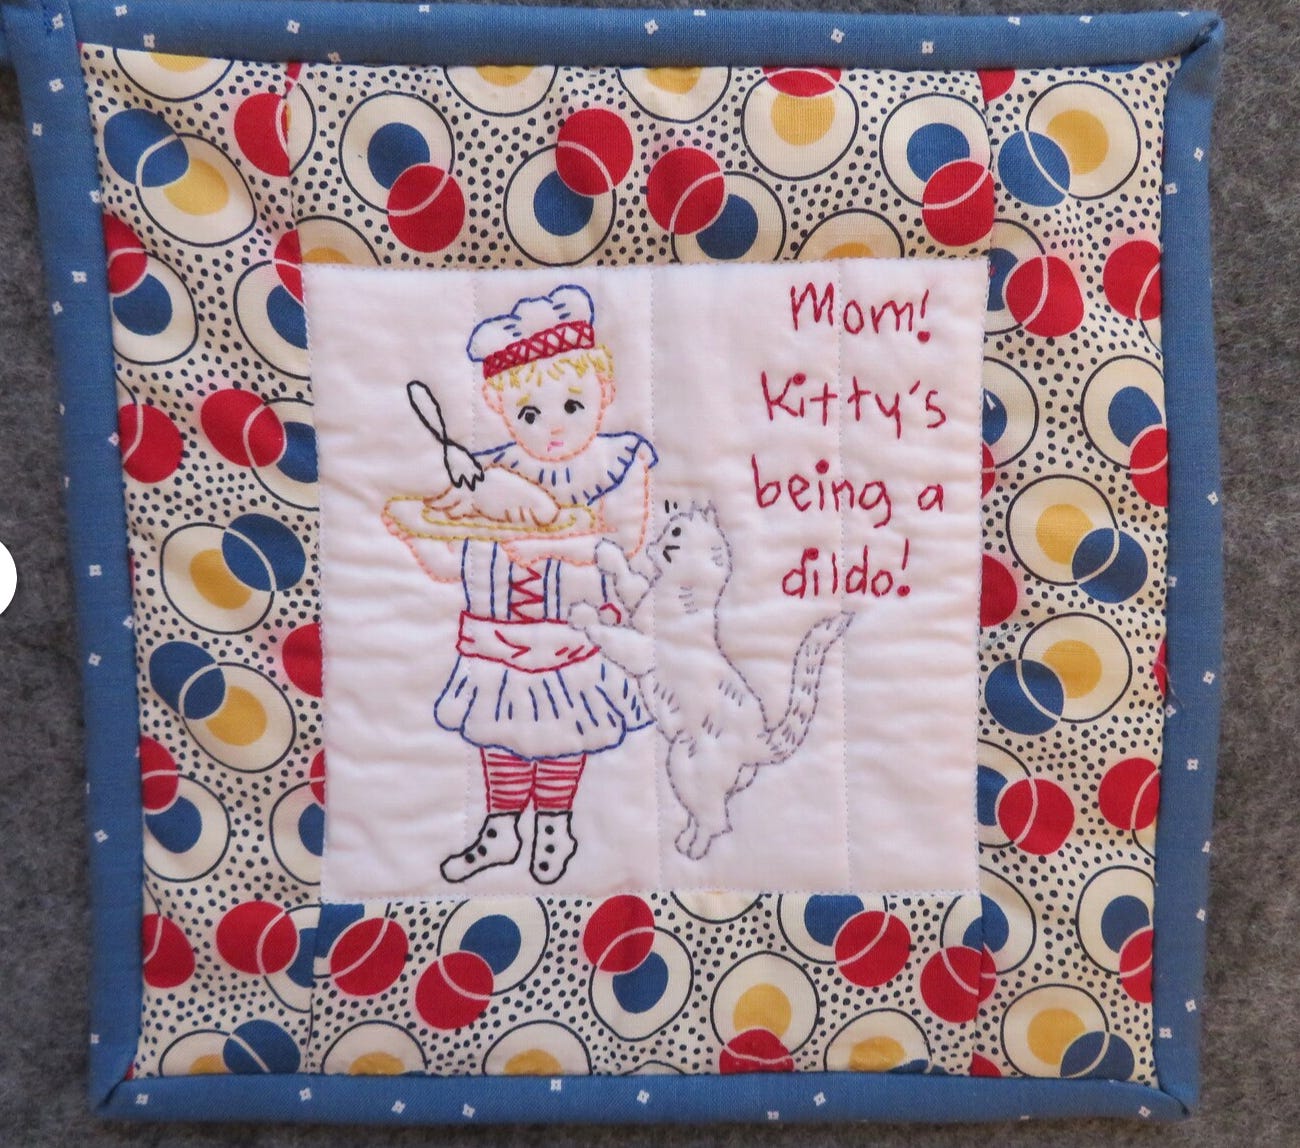 Potholder: kid and cat, cross-stitched: "Mom! Kitty's being a dildo!"